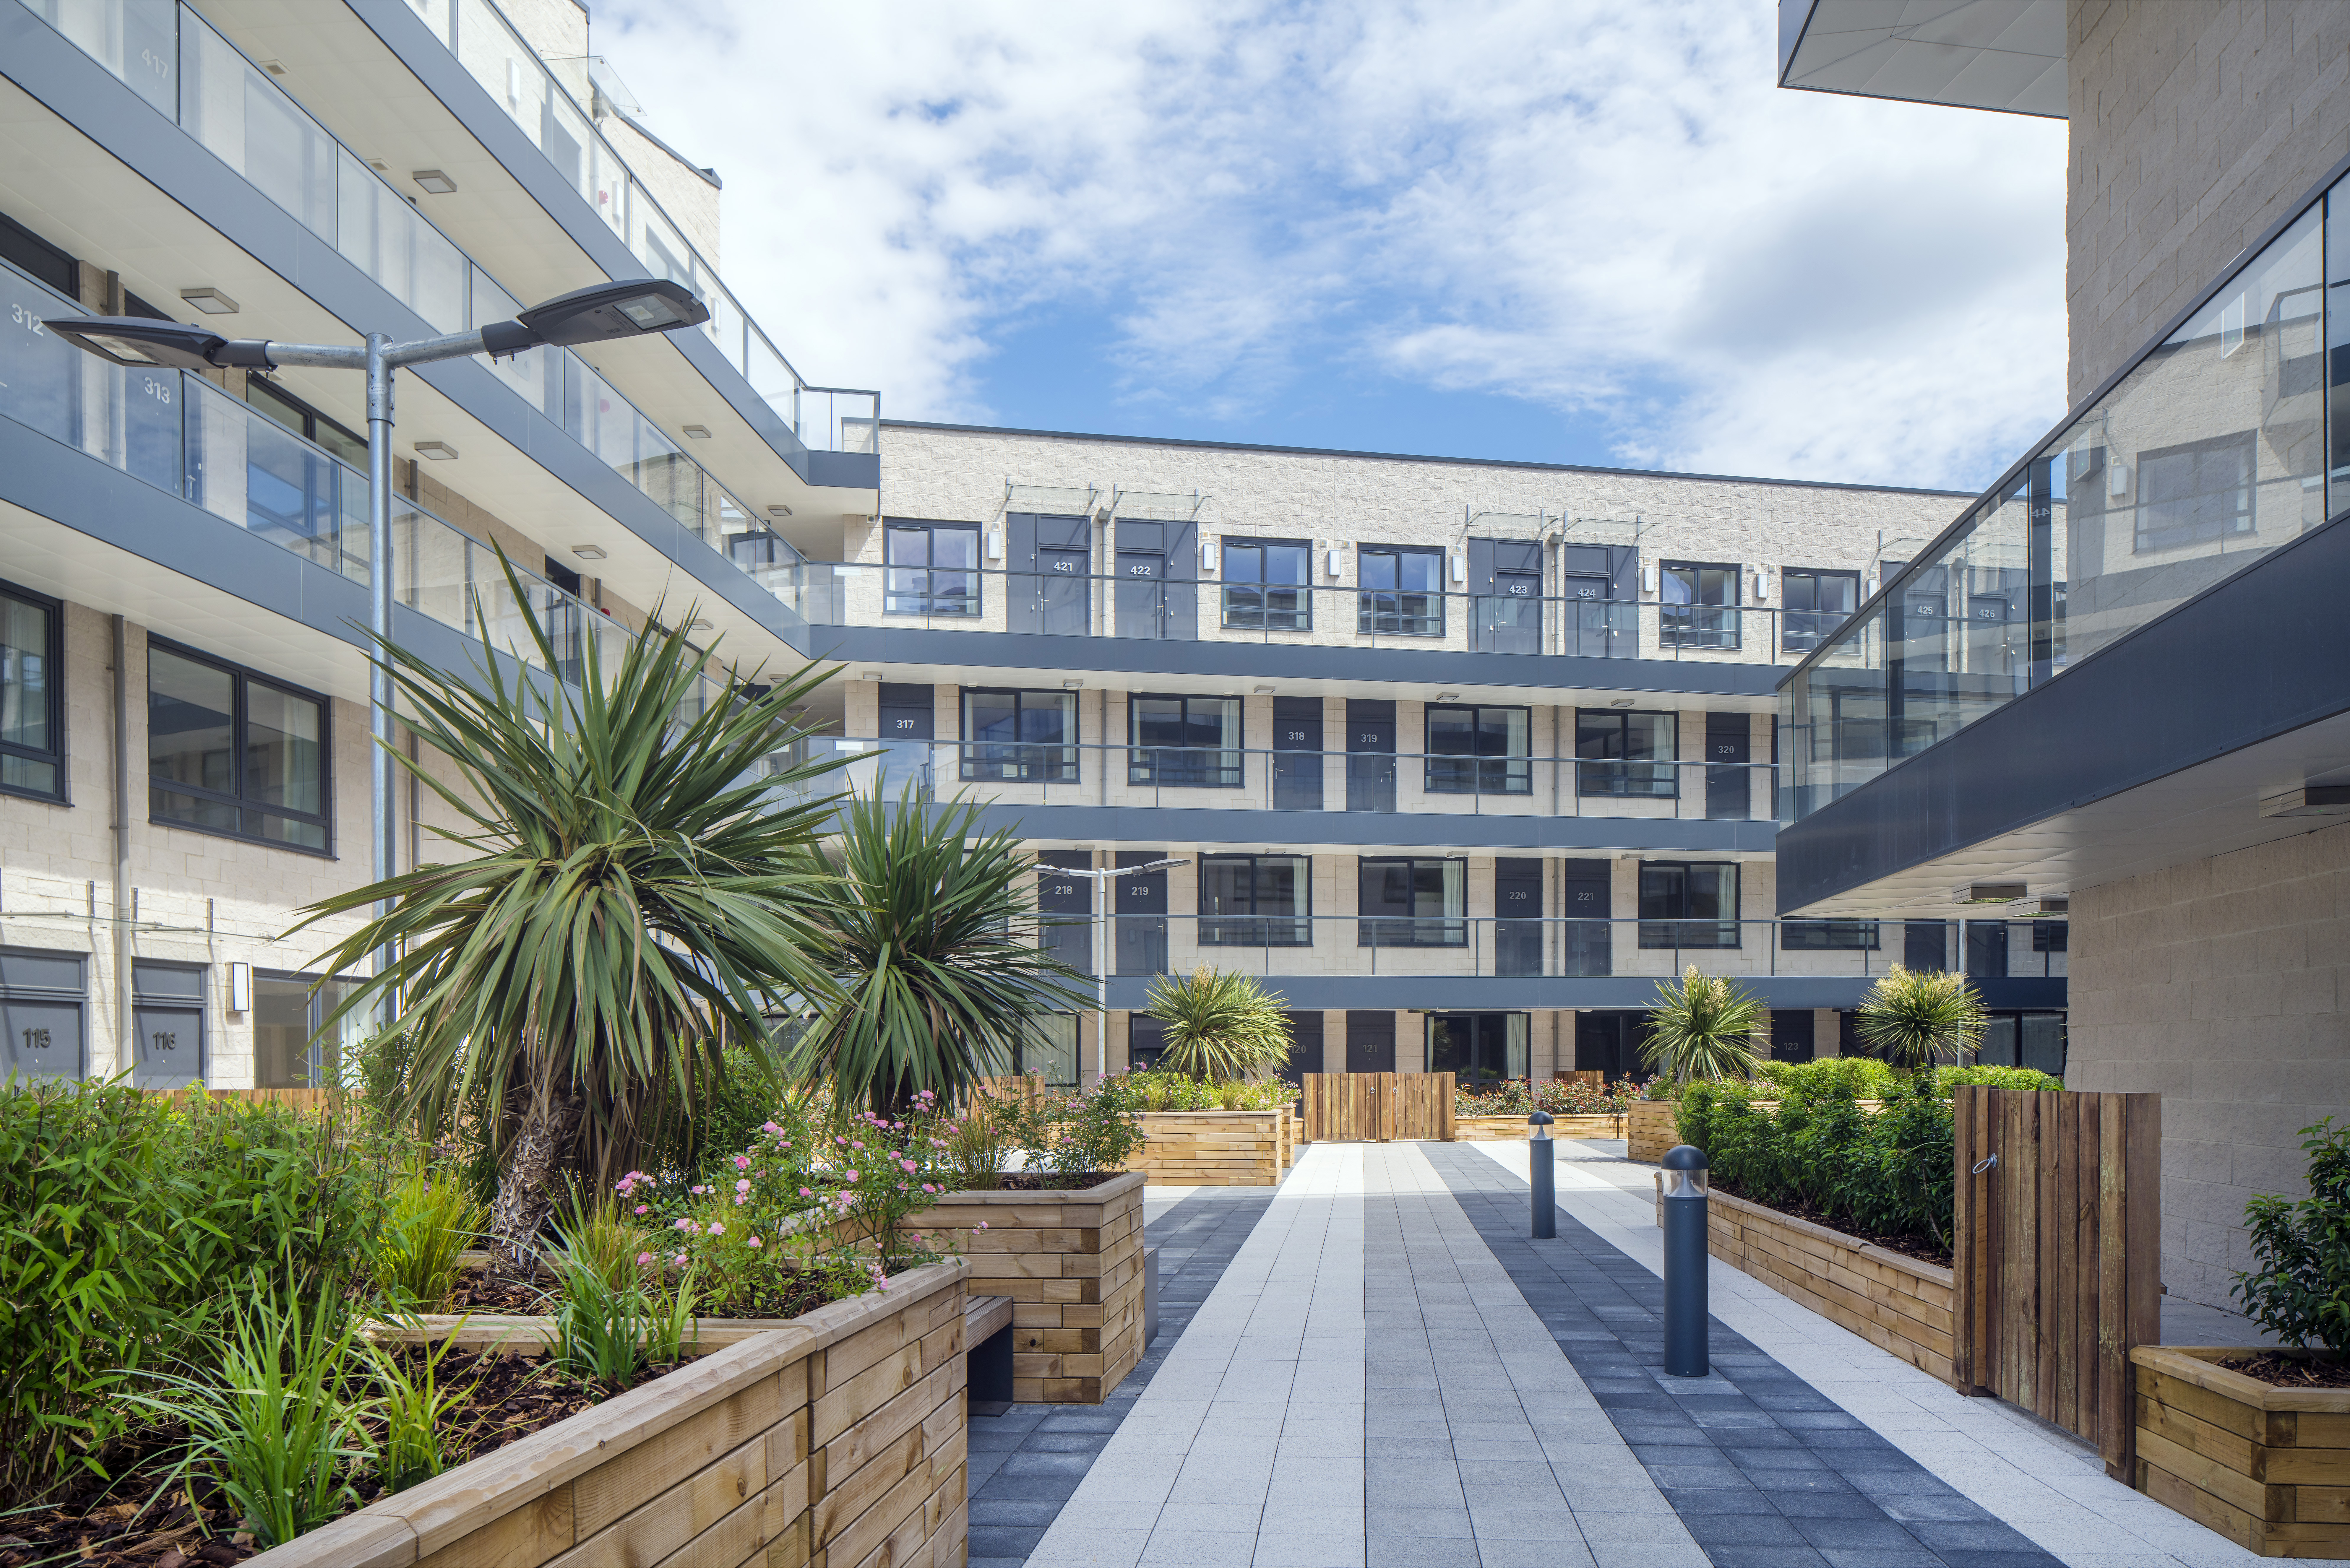 Apartments to Rent by be:here at be:here Hayes, Hillingdon, UB3, development panoramic